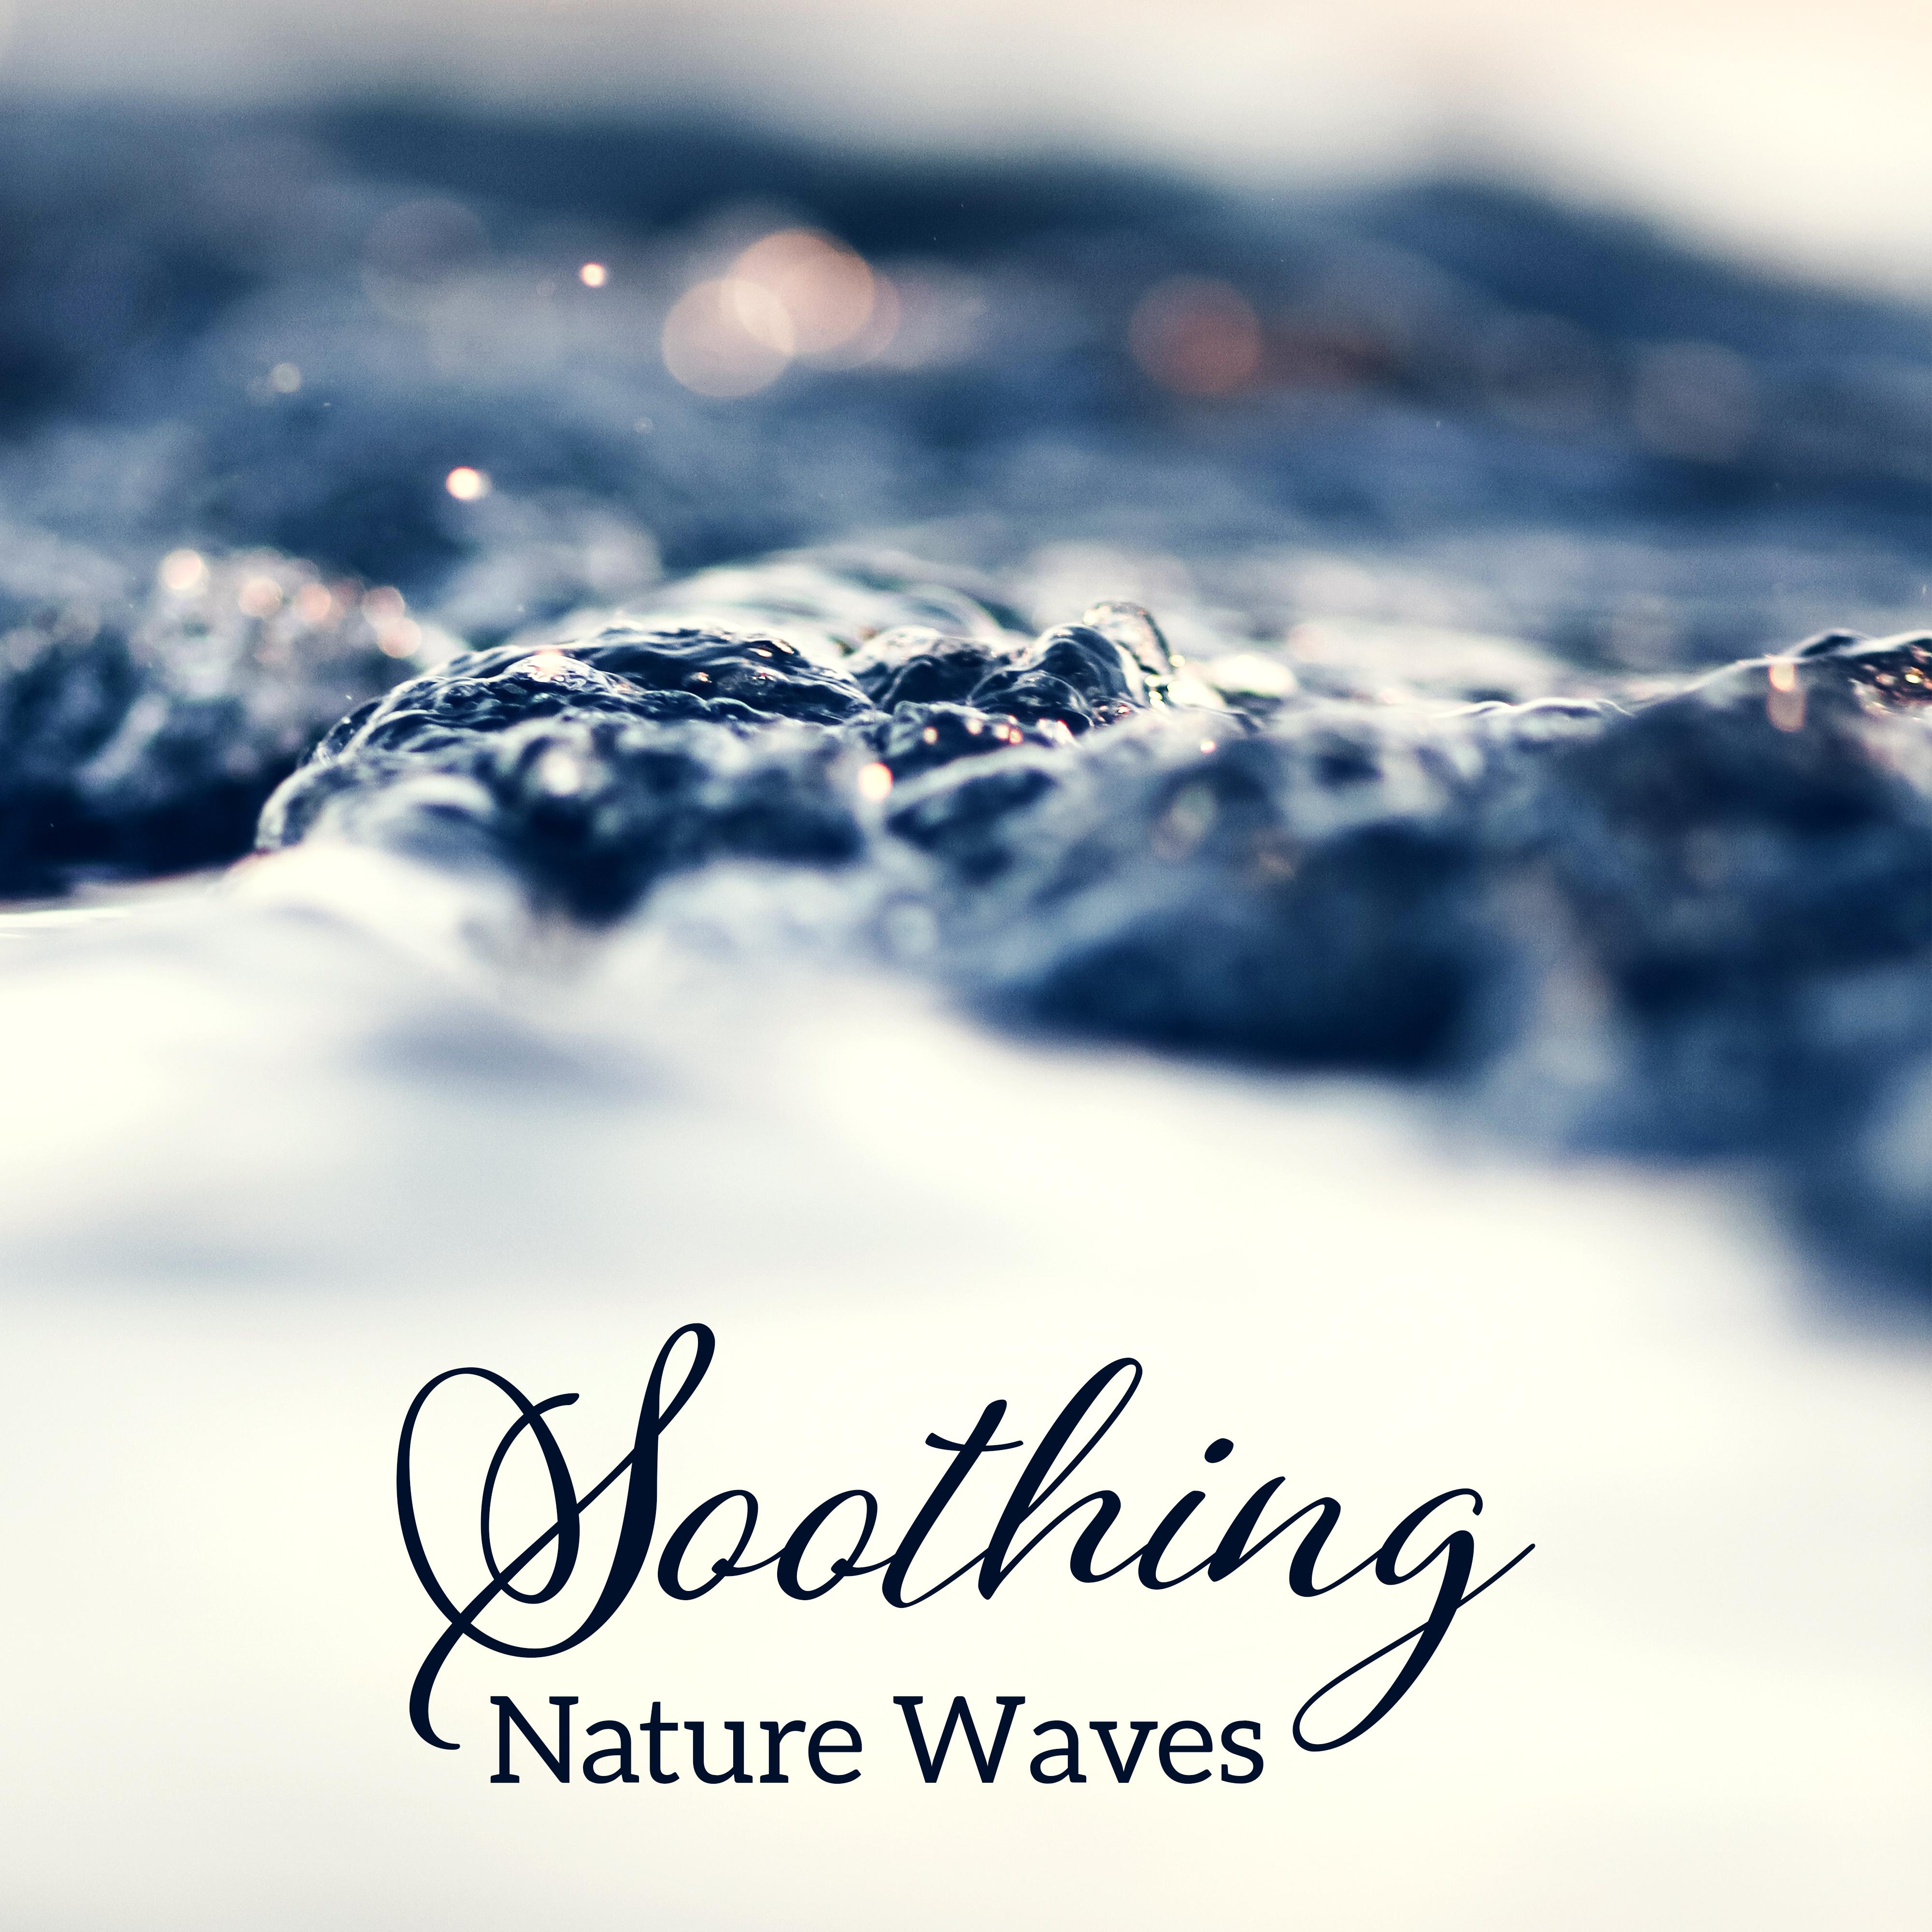 Soothing Nature Waves  Soft  Calm Waves to Relax, Nature Music, Sounds for Peaceful Mind